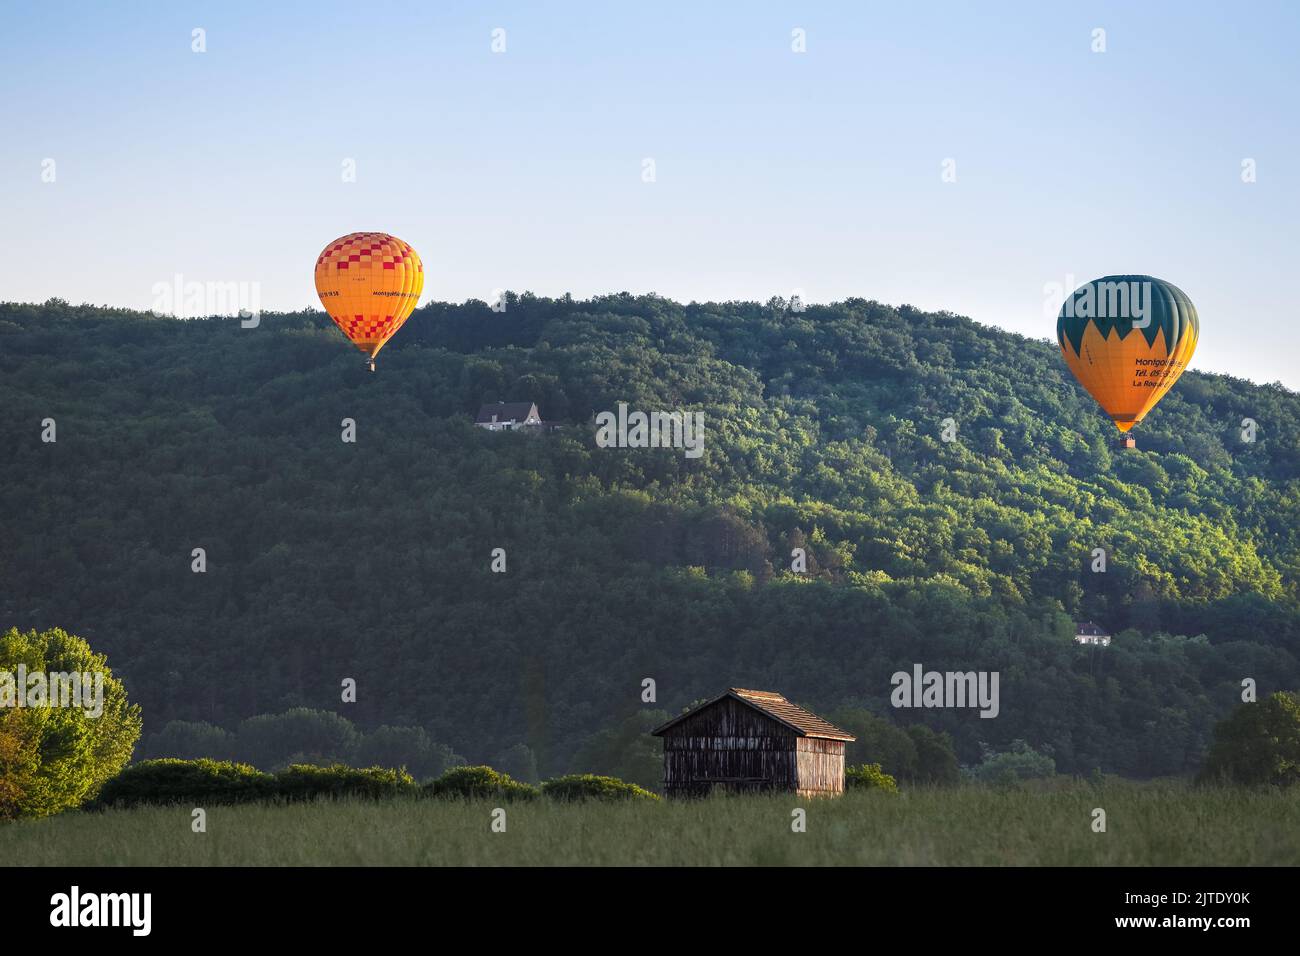 Hot Air Balloons Illuminated by Late Evening Light near the Village of La Roque-Gageac, Dordogne, Aquitaine, France, EU. Stock Photo